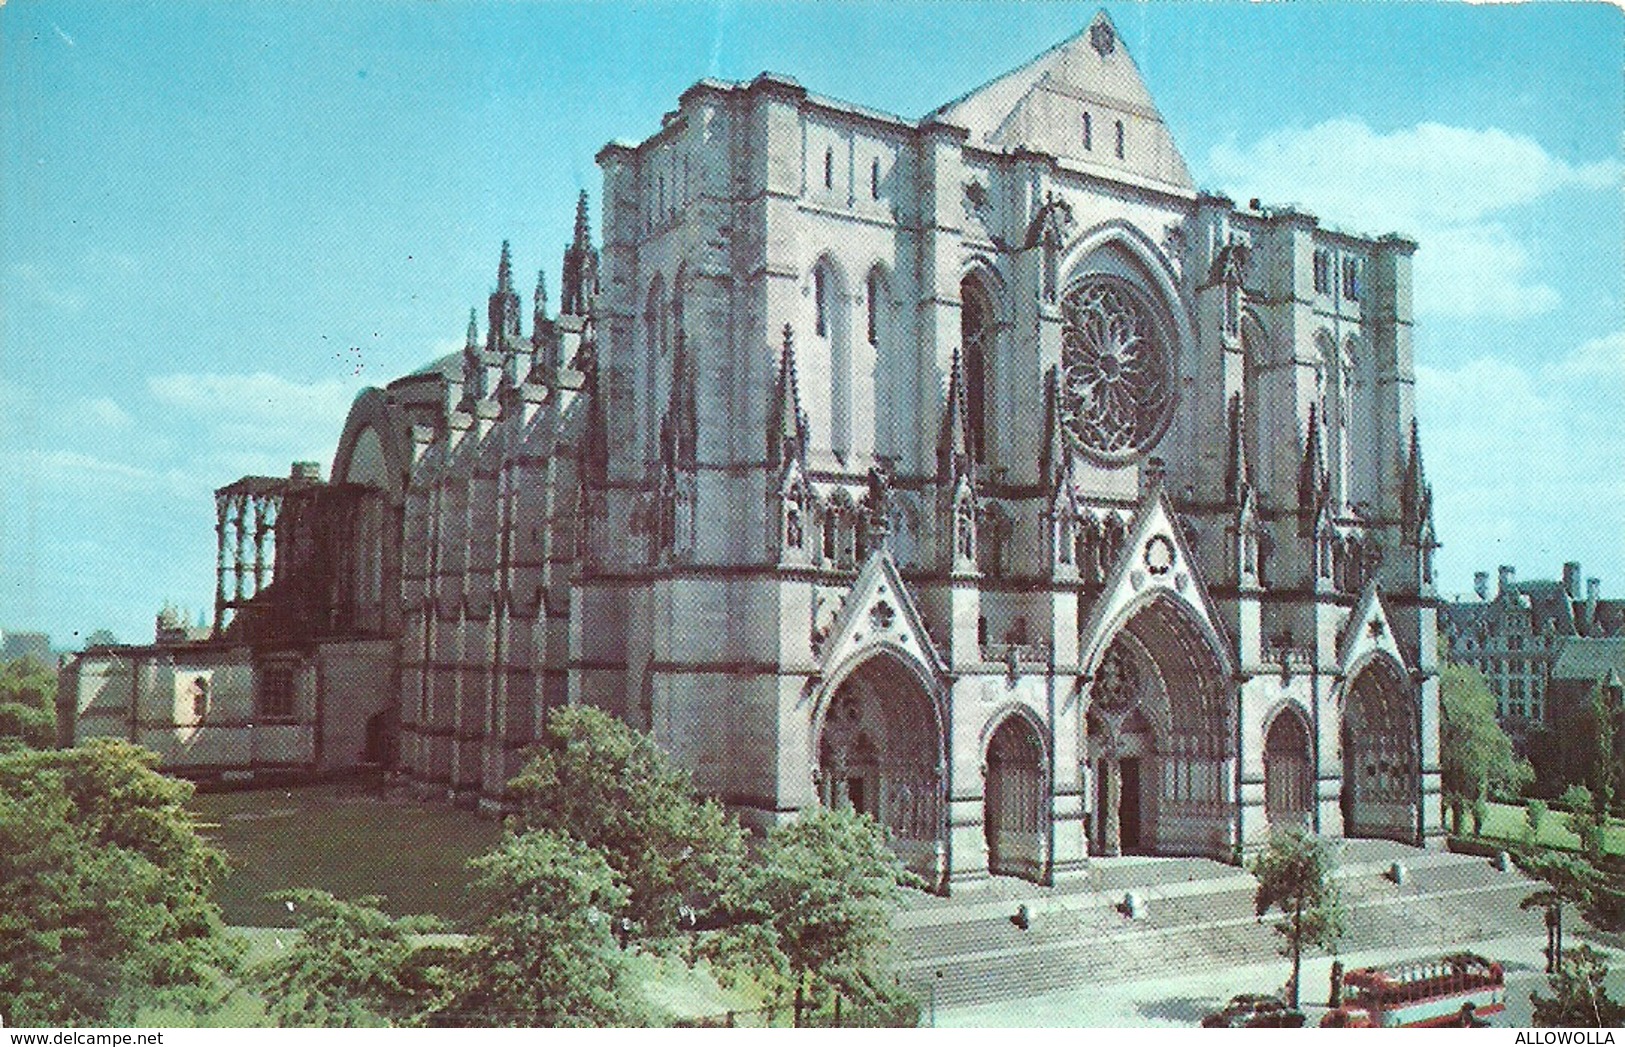 986 "THE CATHEDRAL OF ST. JOHN THE DIVINE- N.Y.  " CARTOLINA POSTALE ORIG.  NON SPED. - Chiese